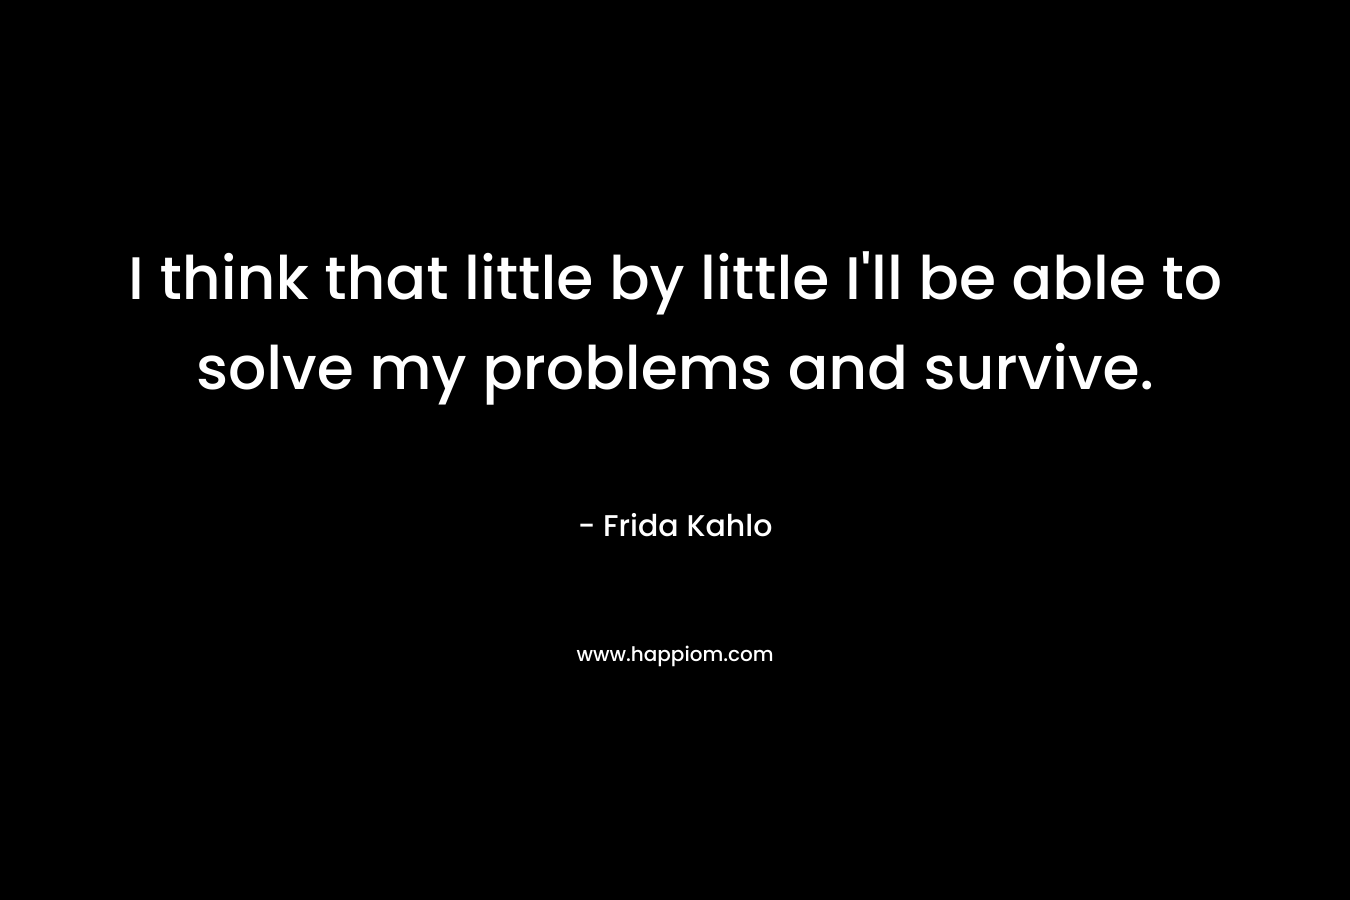 I think that little by little I'll be able to solve my problems and survive.